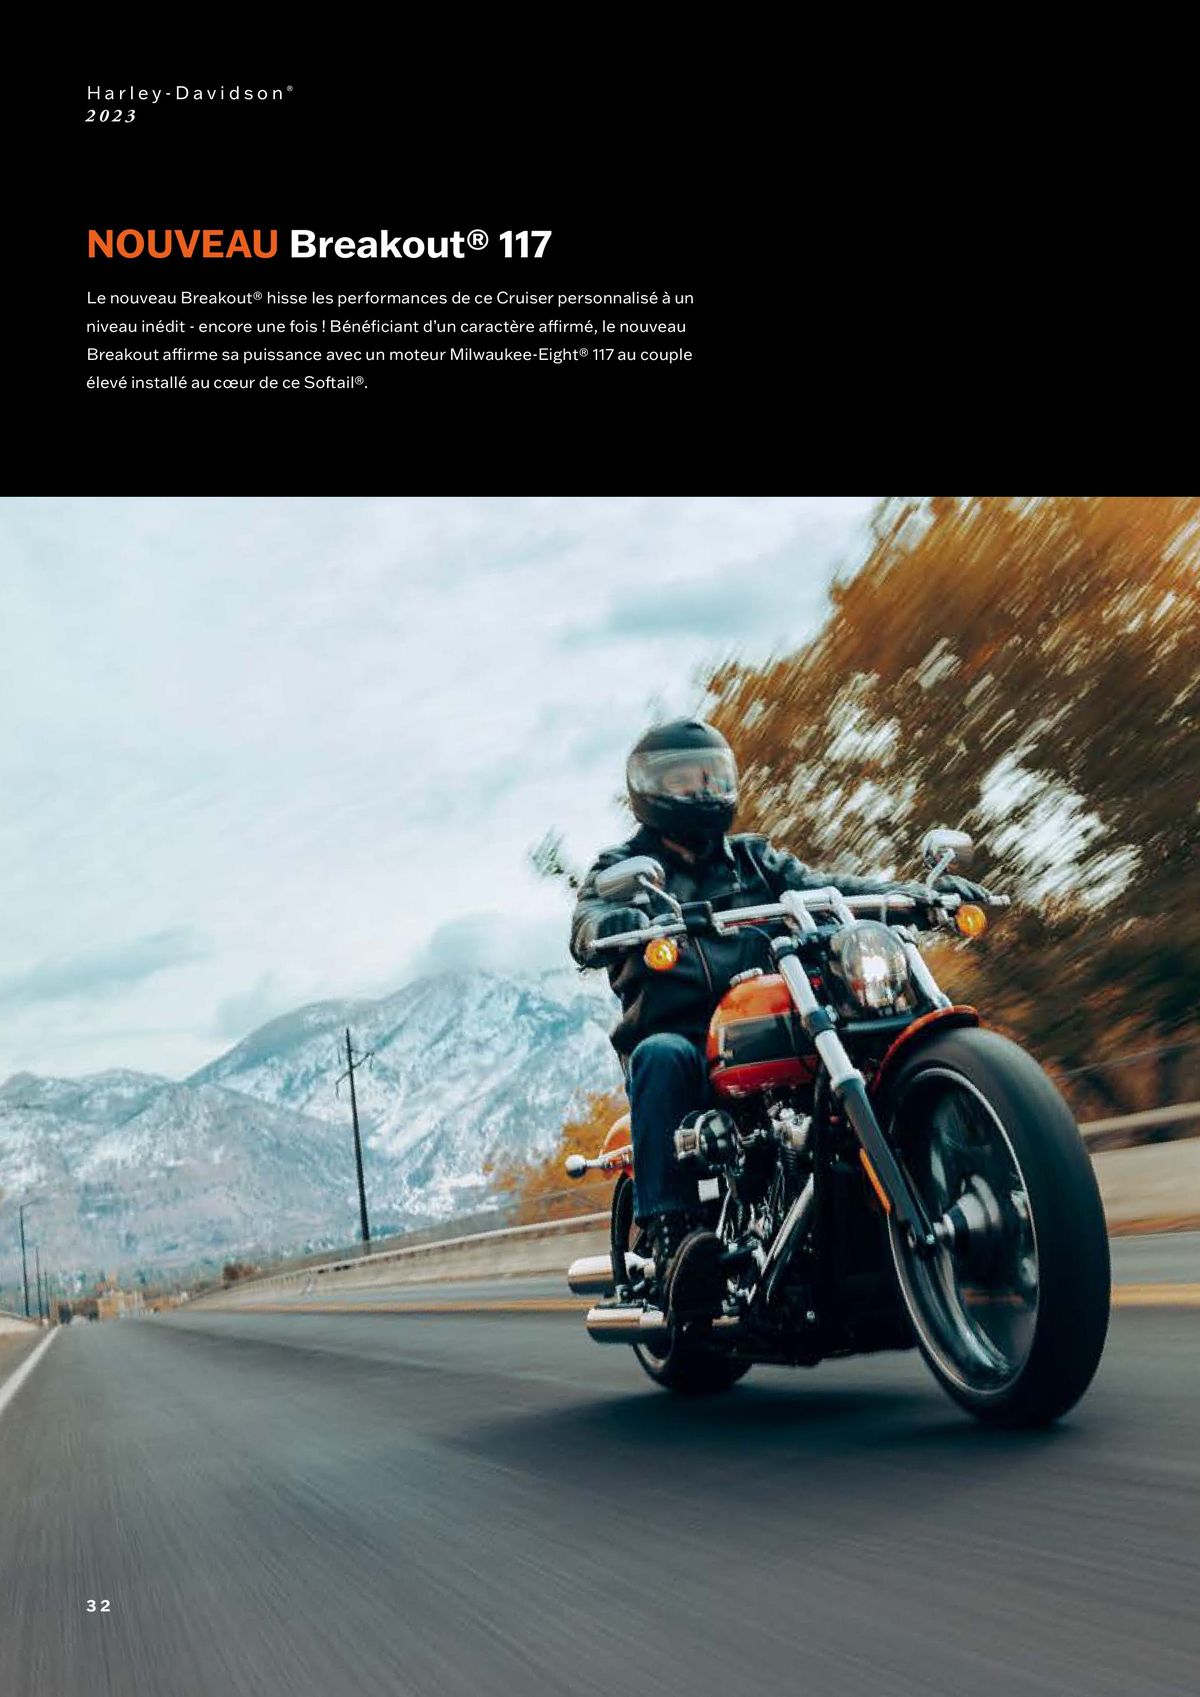 Catalogue Nouvelle Gamme Harley-Davidson, page 00032